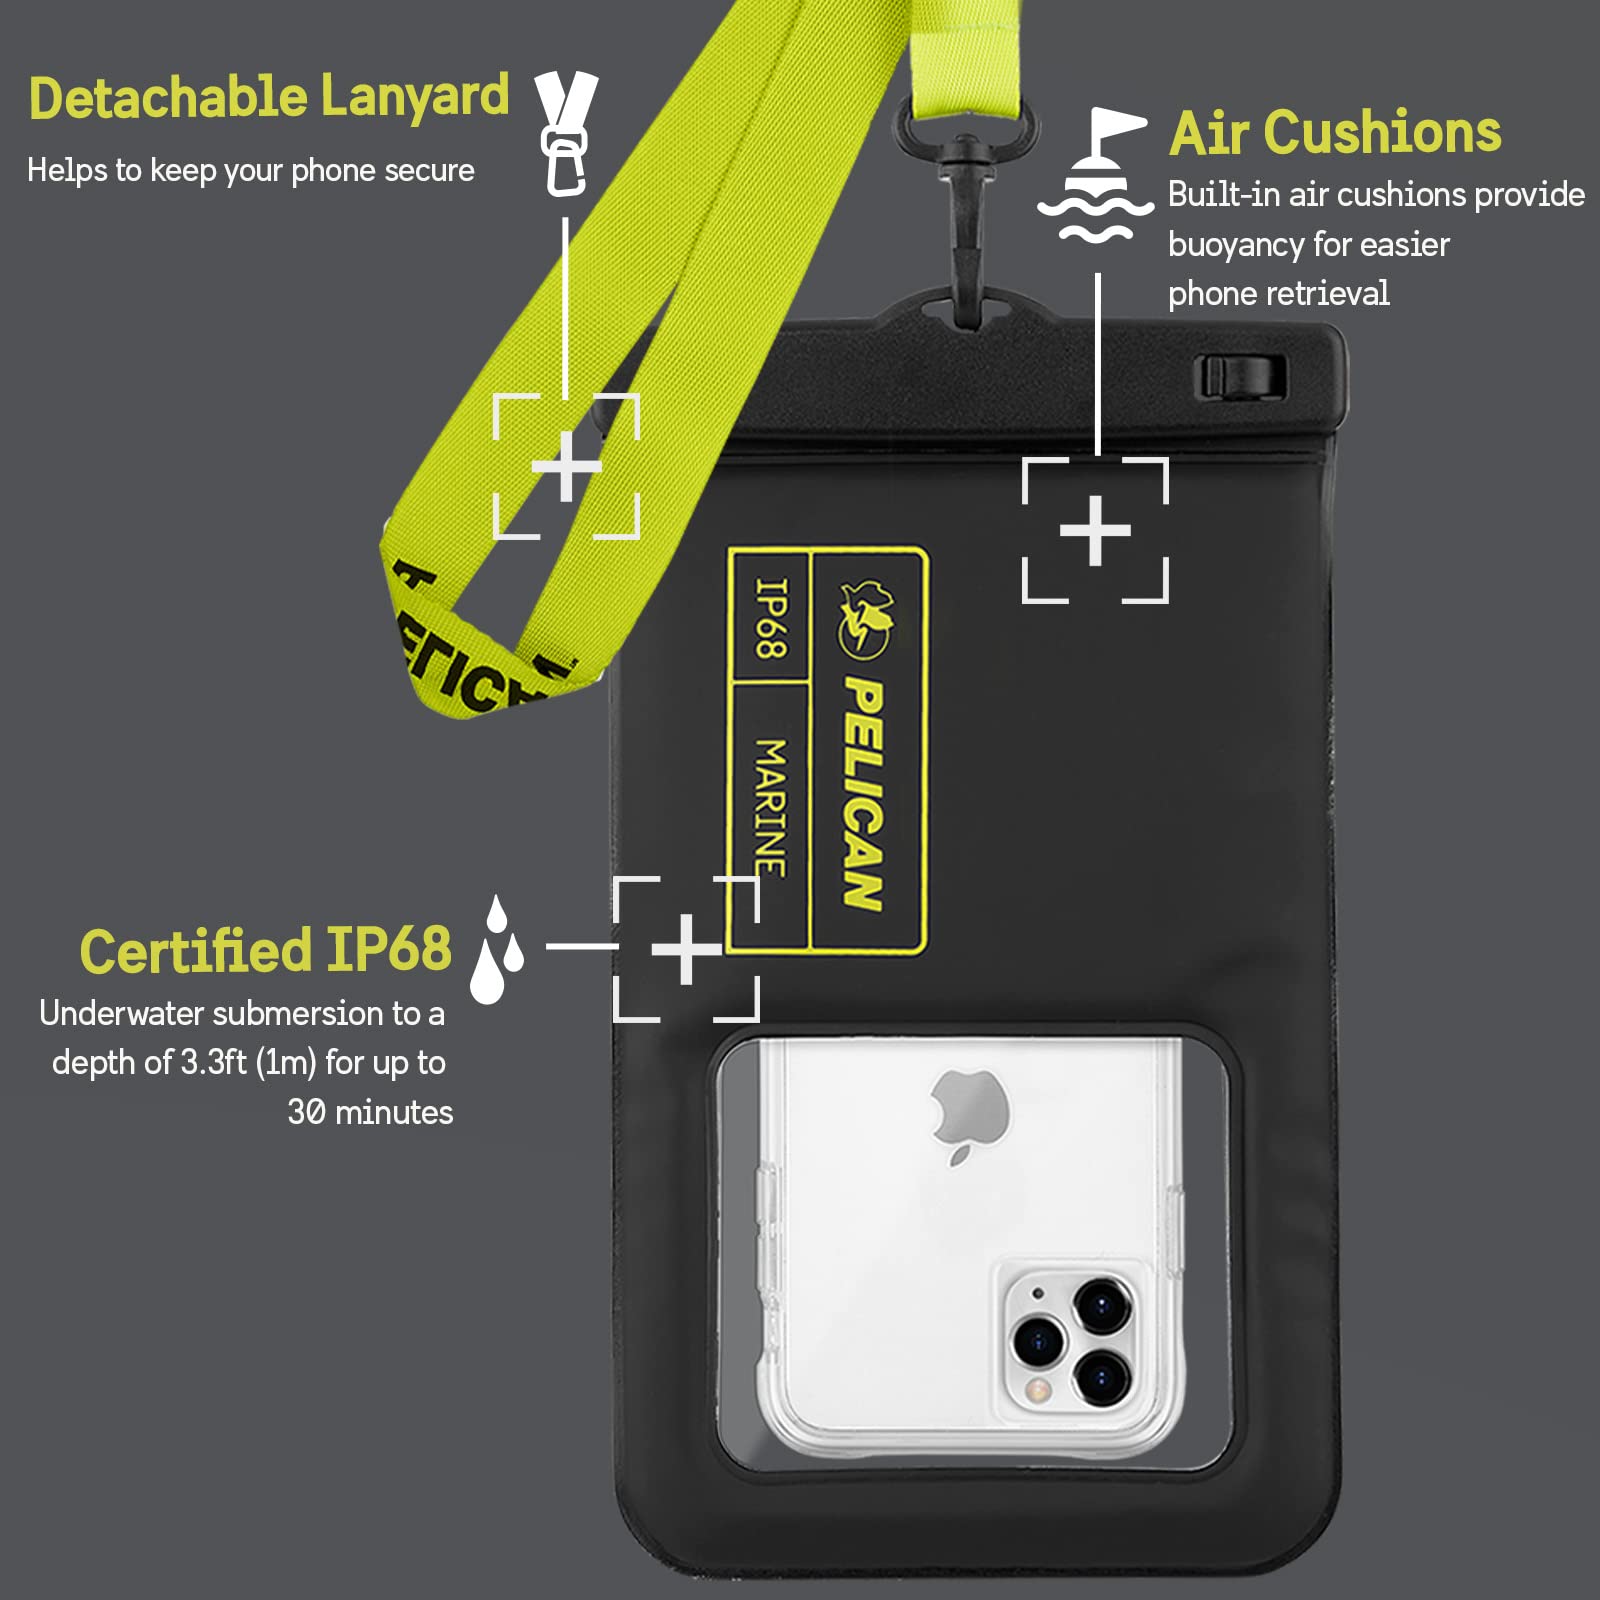 Pelican Marine 2 Pack - IP68 Waterproof Phone Pouch / Case (XL Size) - Floating Phone Case - iPhone 14 Pro Max/ 13 Pro Max/ 12 Pro Max/ 11/ S23 Ultra/ Pixel 7 - Detachable Lanyard - Black/Yellow